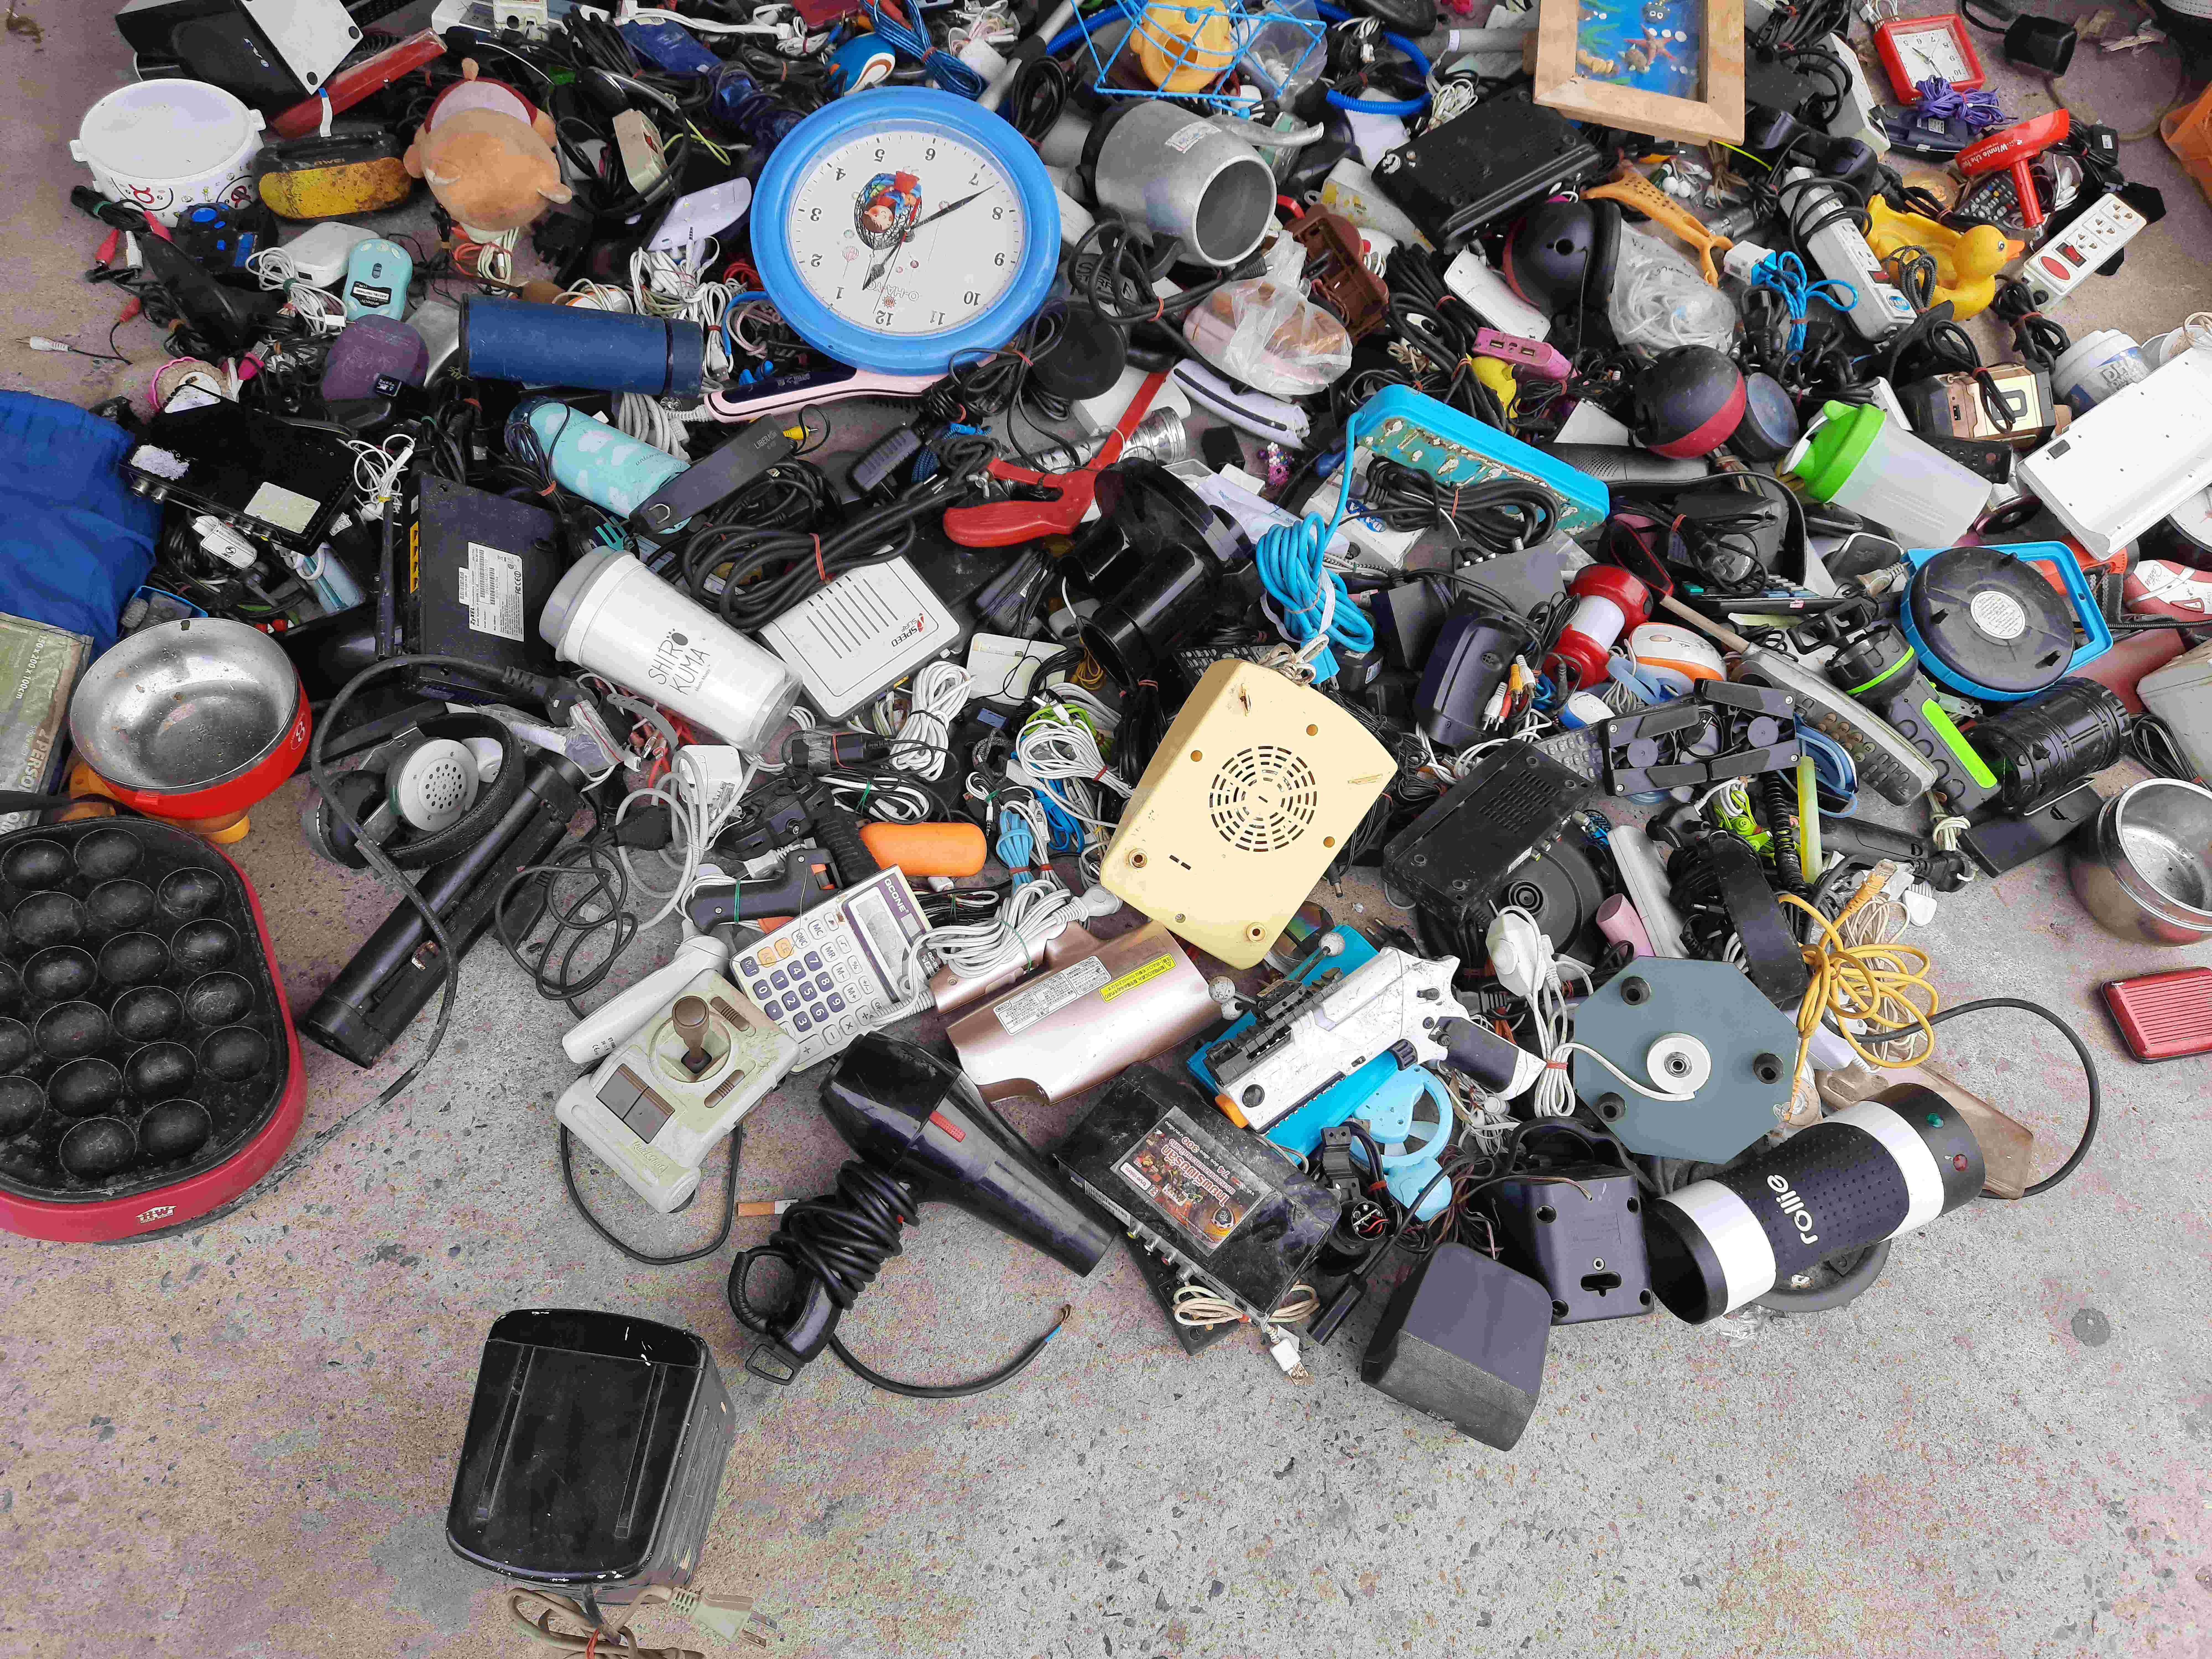  Study: Toys Produce More E-Waste Than Vape Products